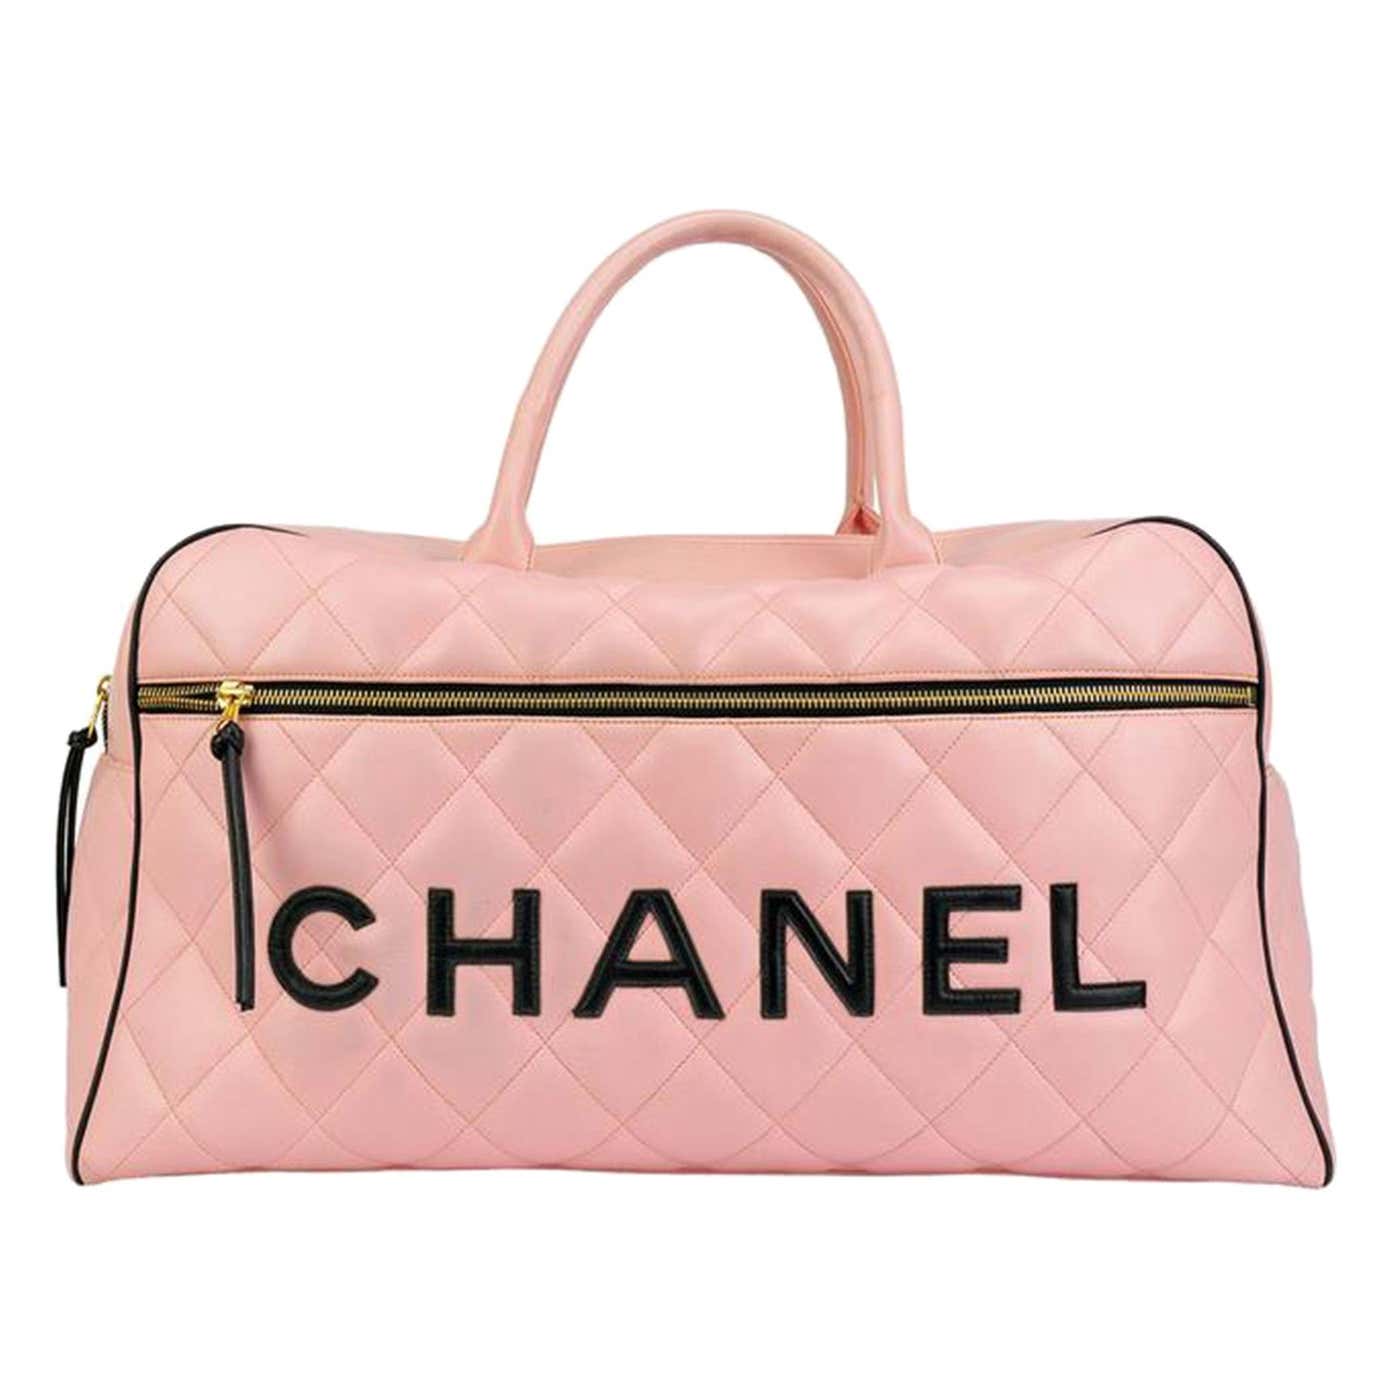 Chanel Rare Pink Vintage 1990 Weekend Duffel Overnight Duffle Tote For ...